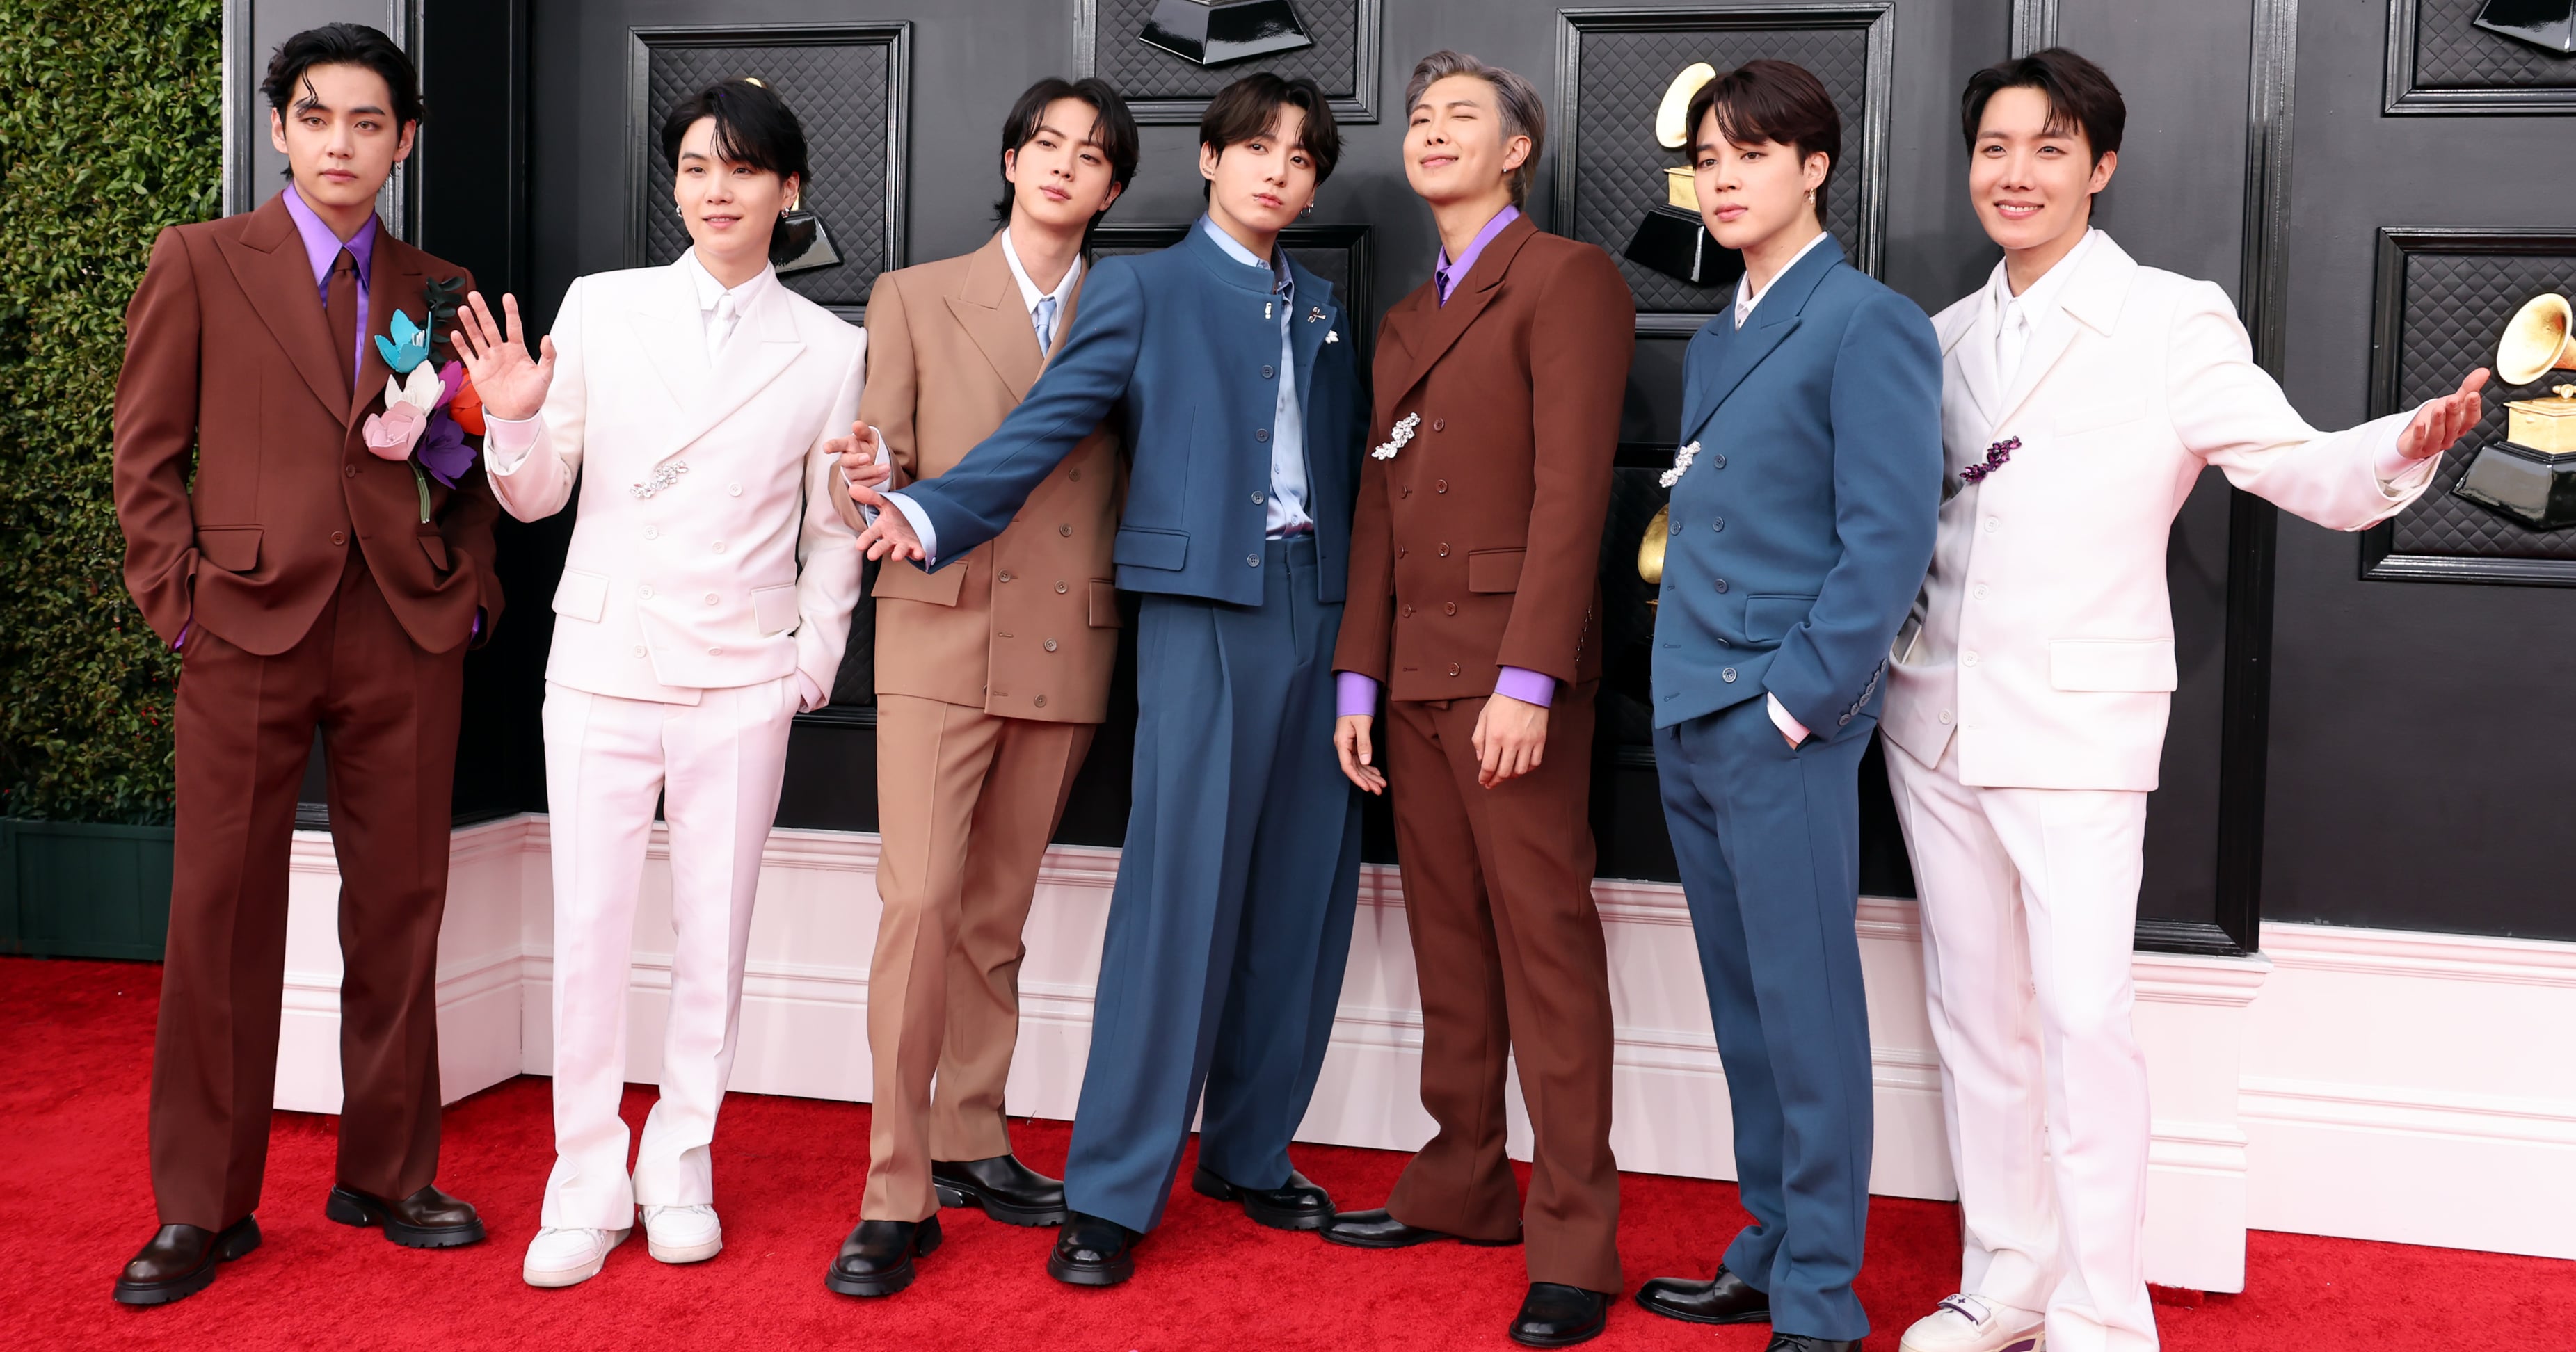 BTS Just Became The 1st K-Pop Group To Present An Award At Grammys